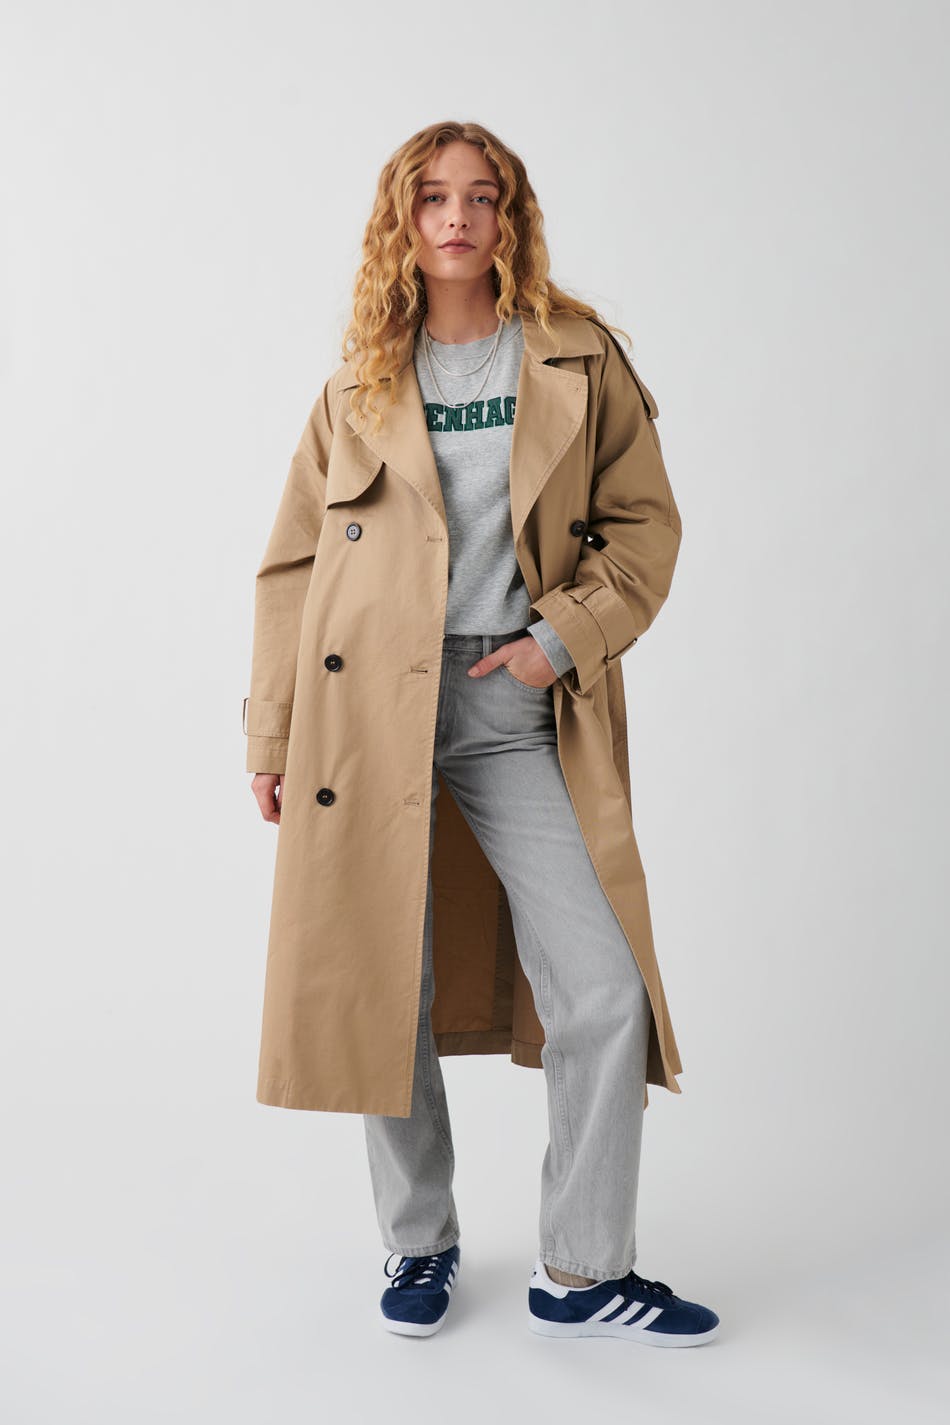 Gina Tricot - Maxi trench coat - trenchcoats - Beige - S - Female